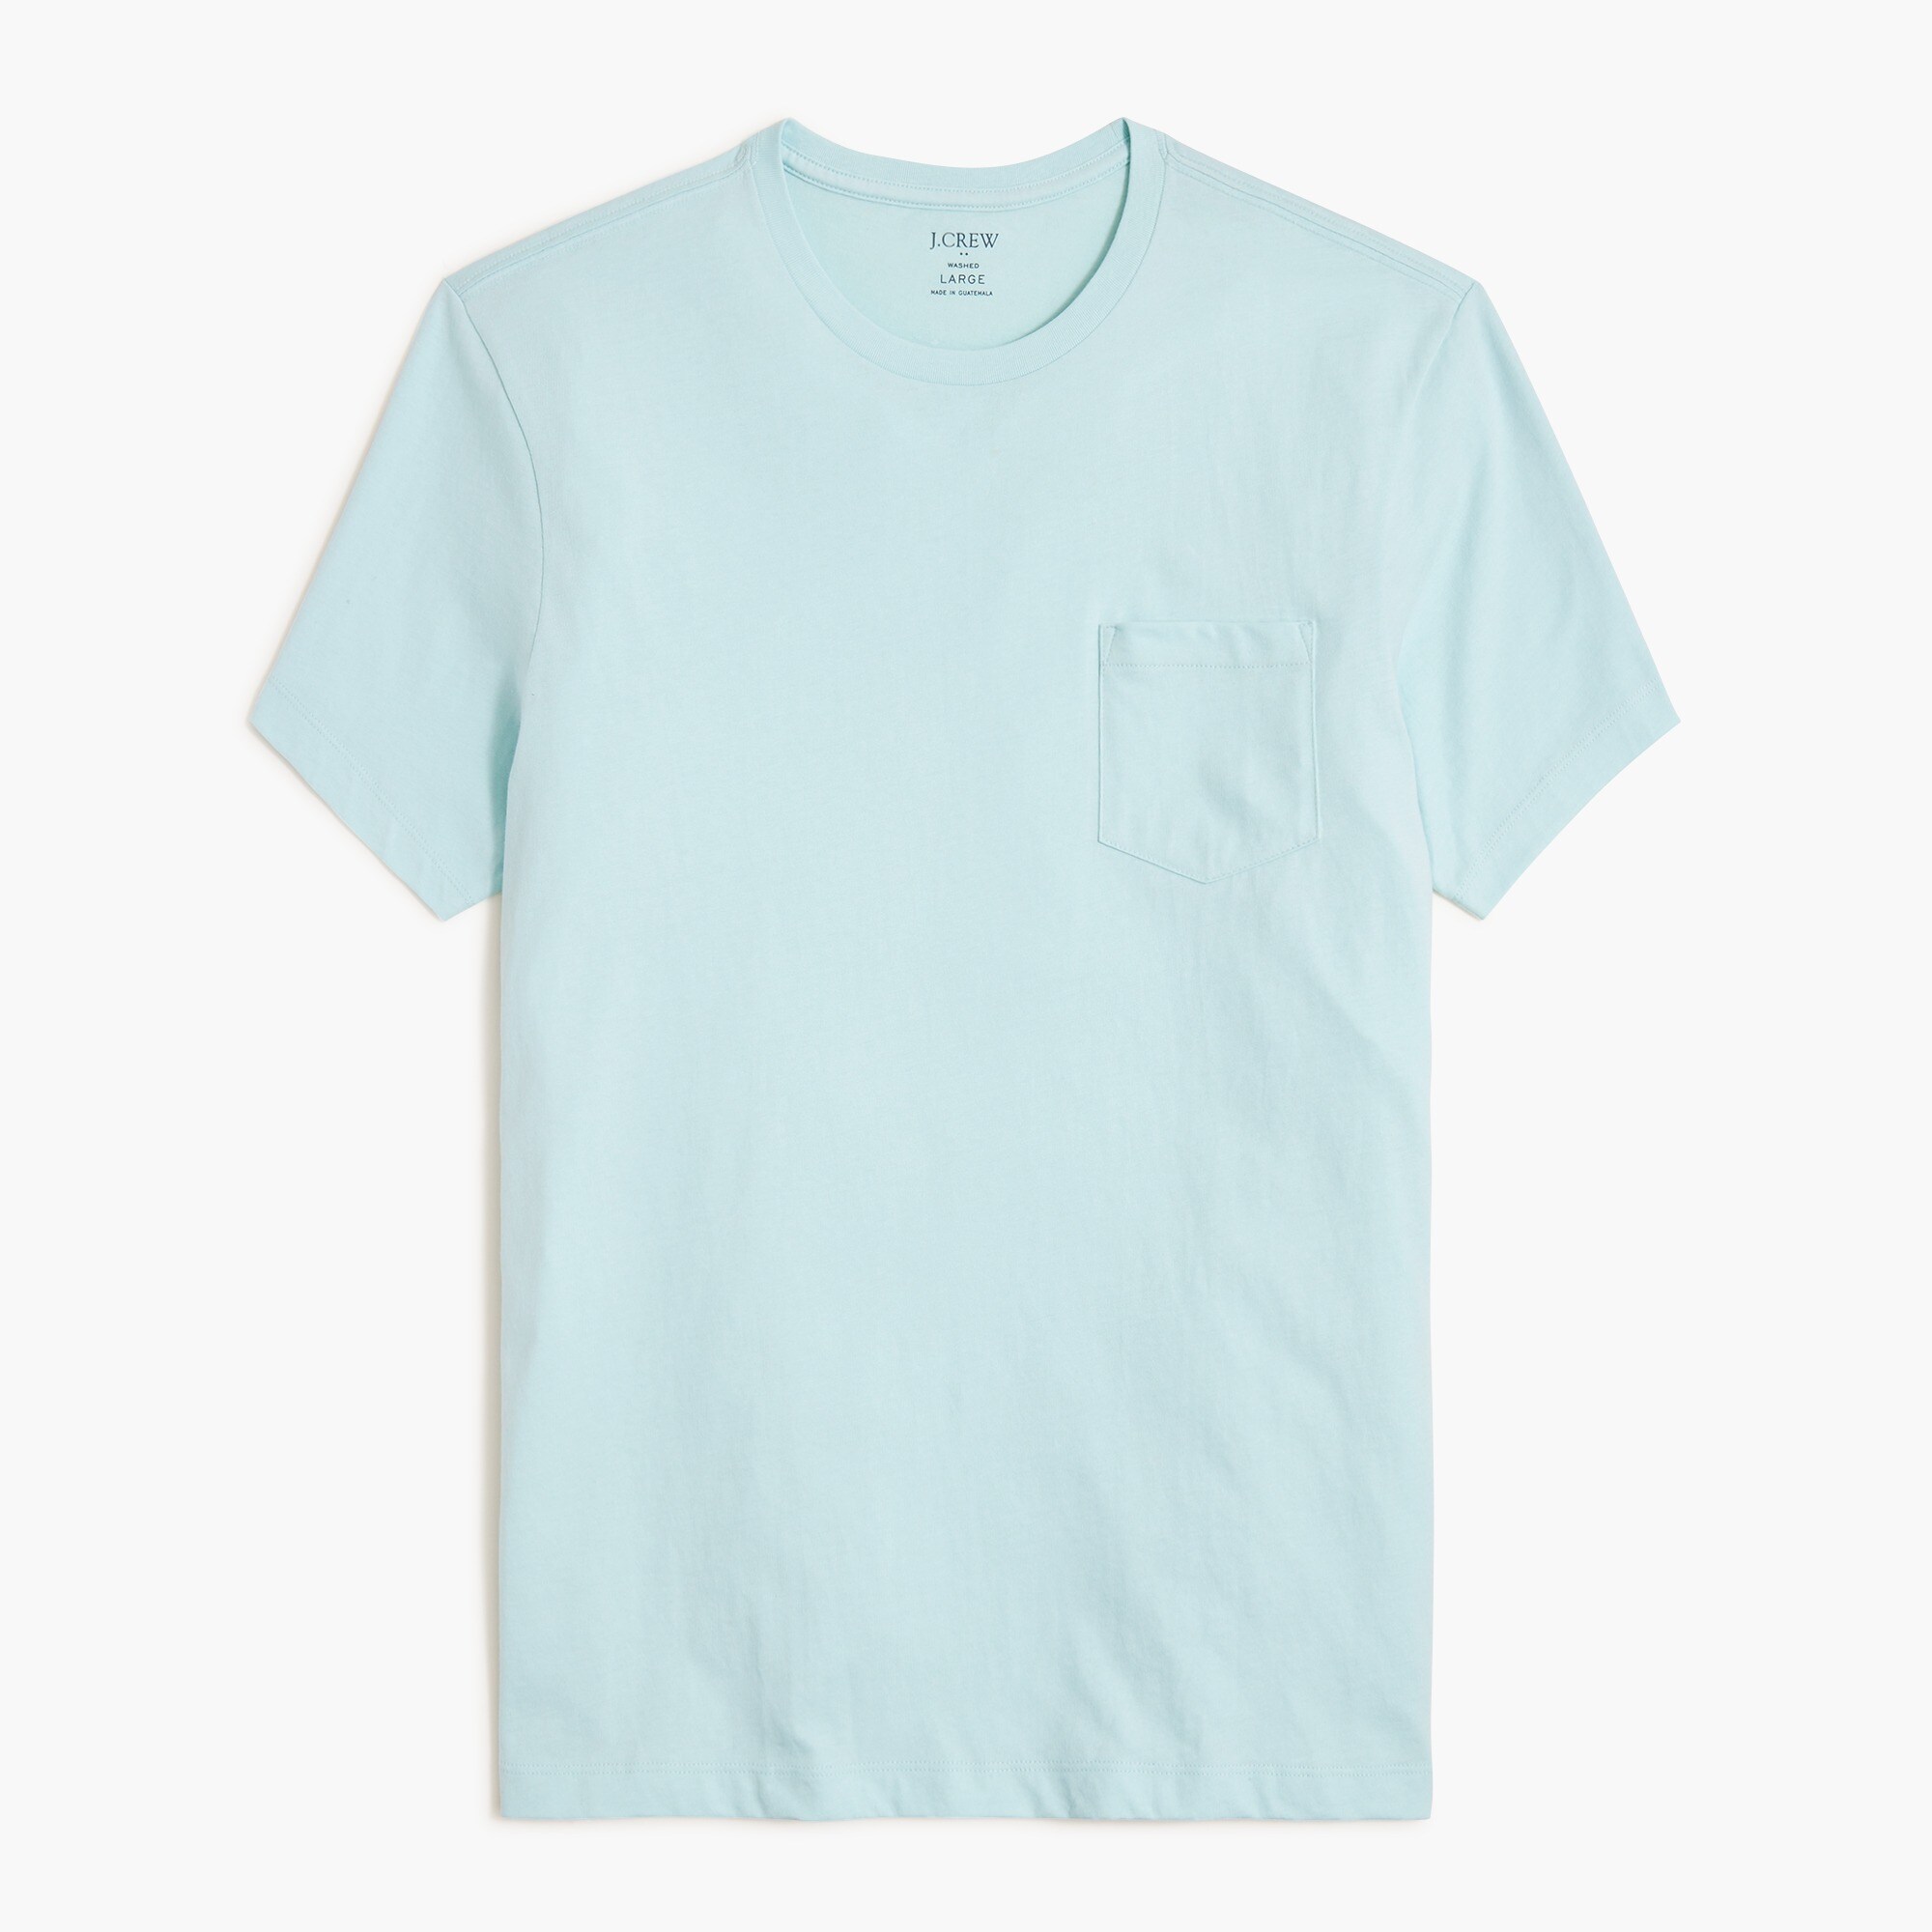 mens Cotton washed jersey pocket tee